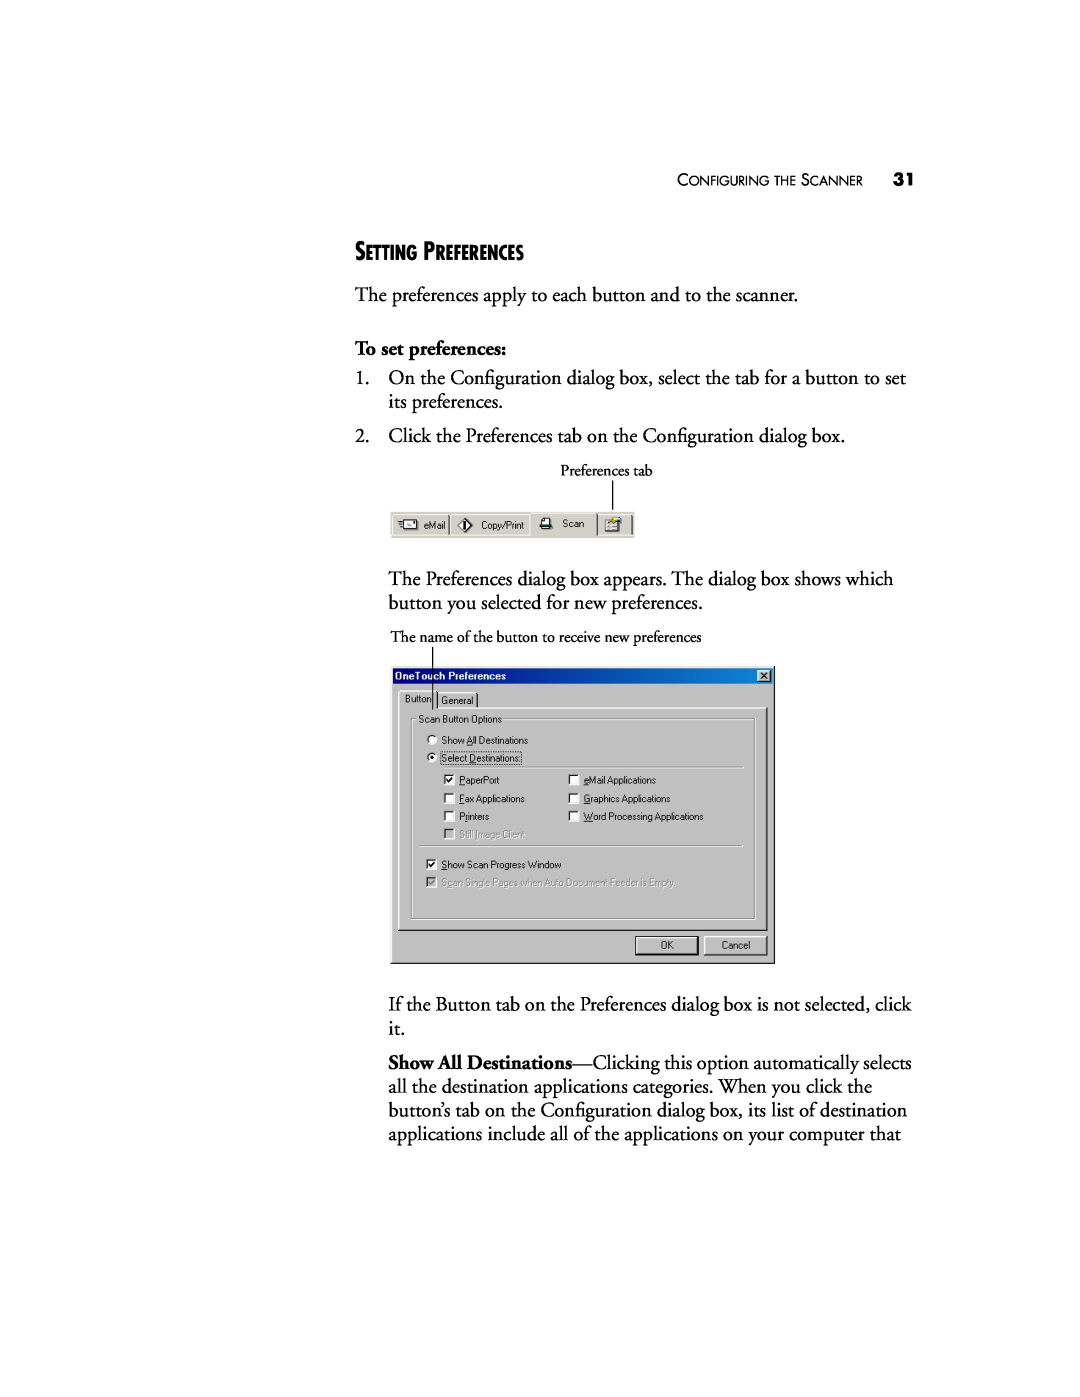 Visioneer 5820 manual Setting Preferences, To set preferences 